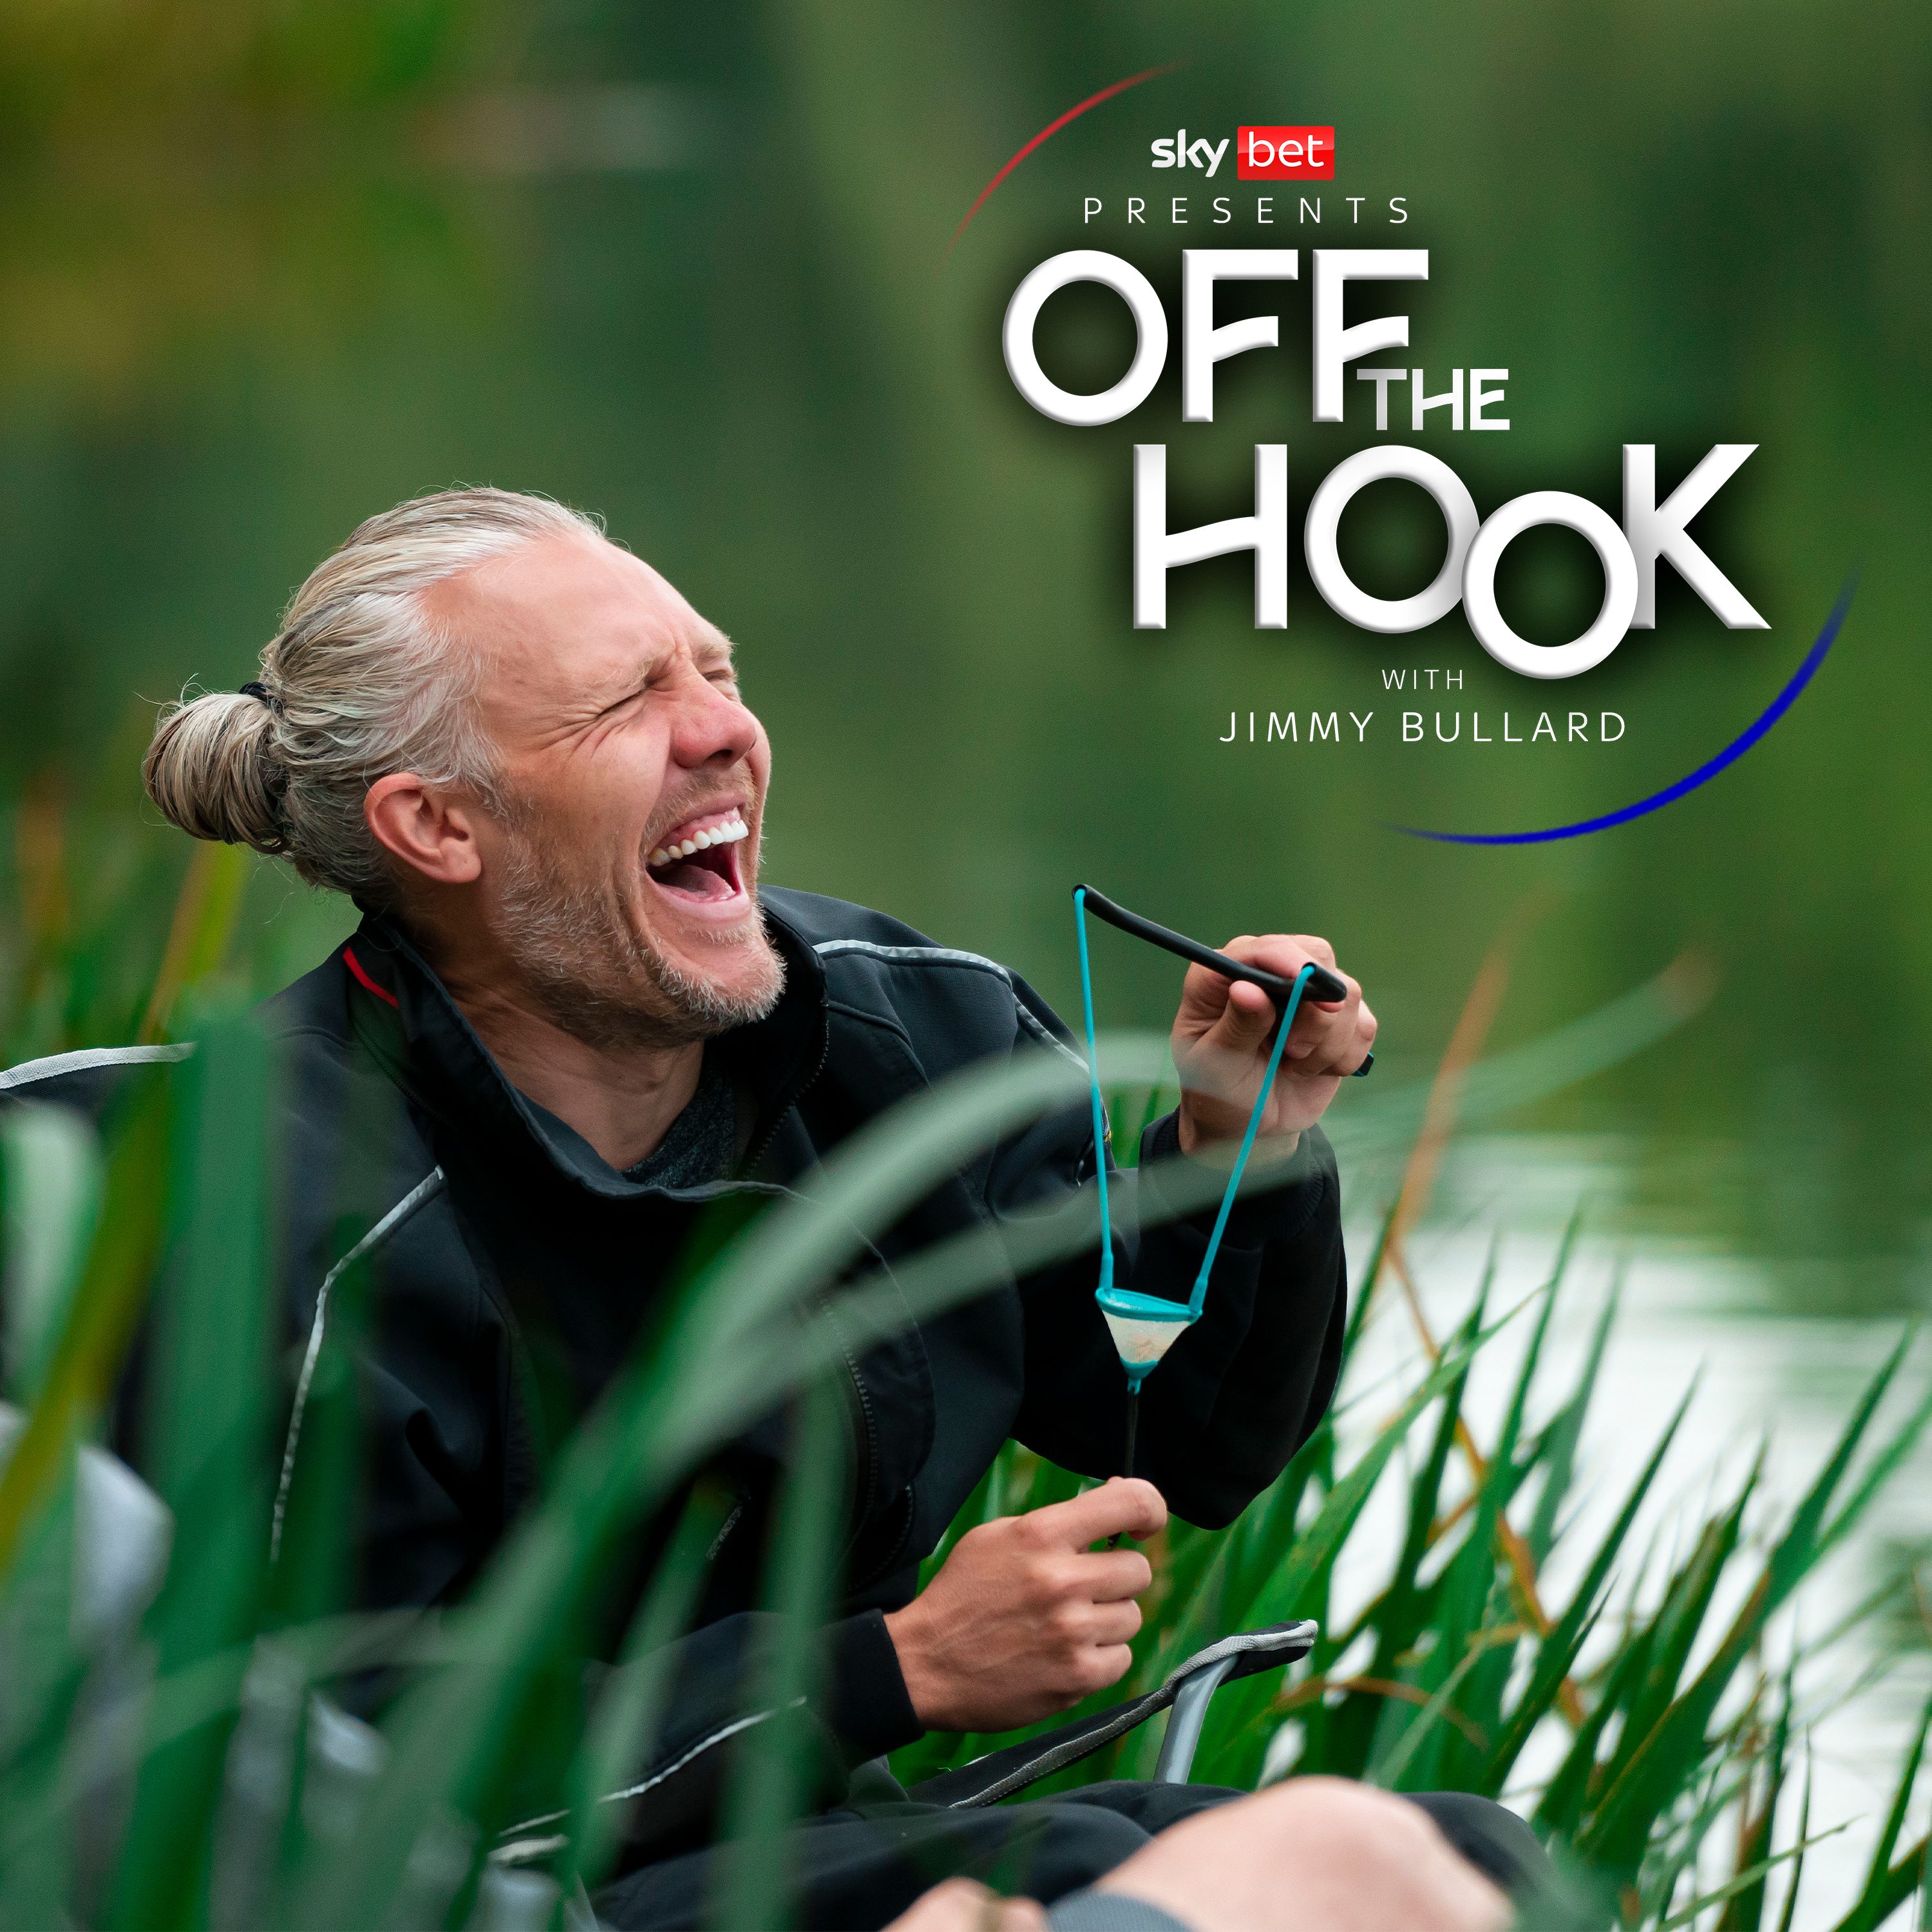 Introducing Off The Hook with Jimmy Bullard